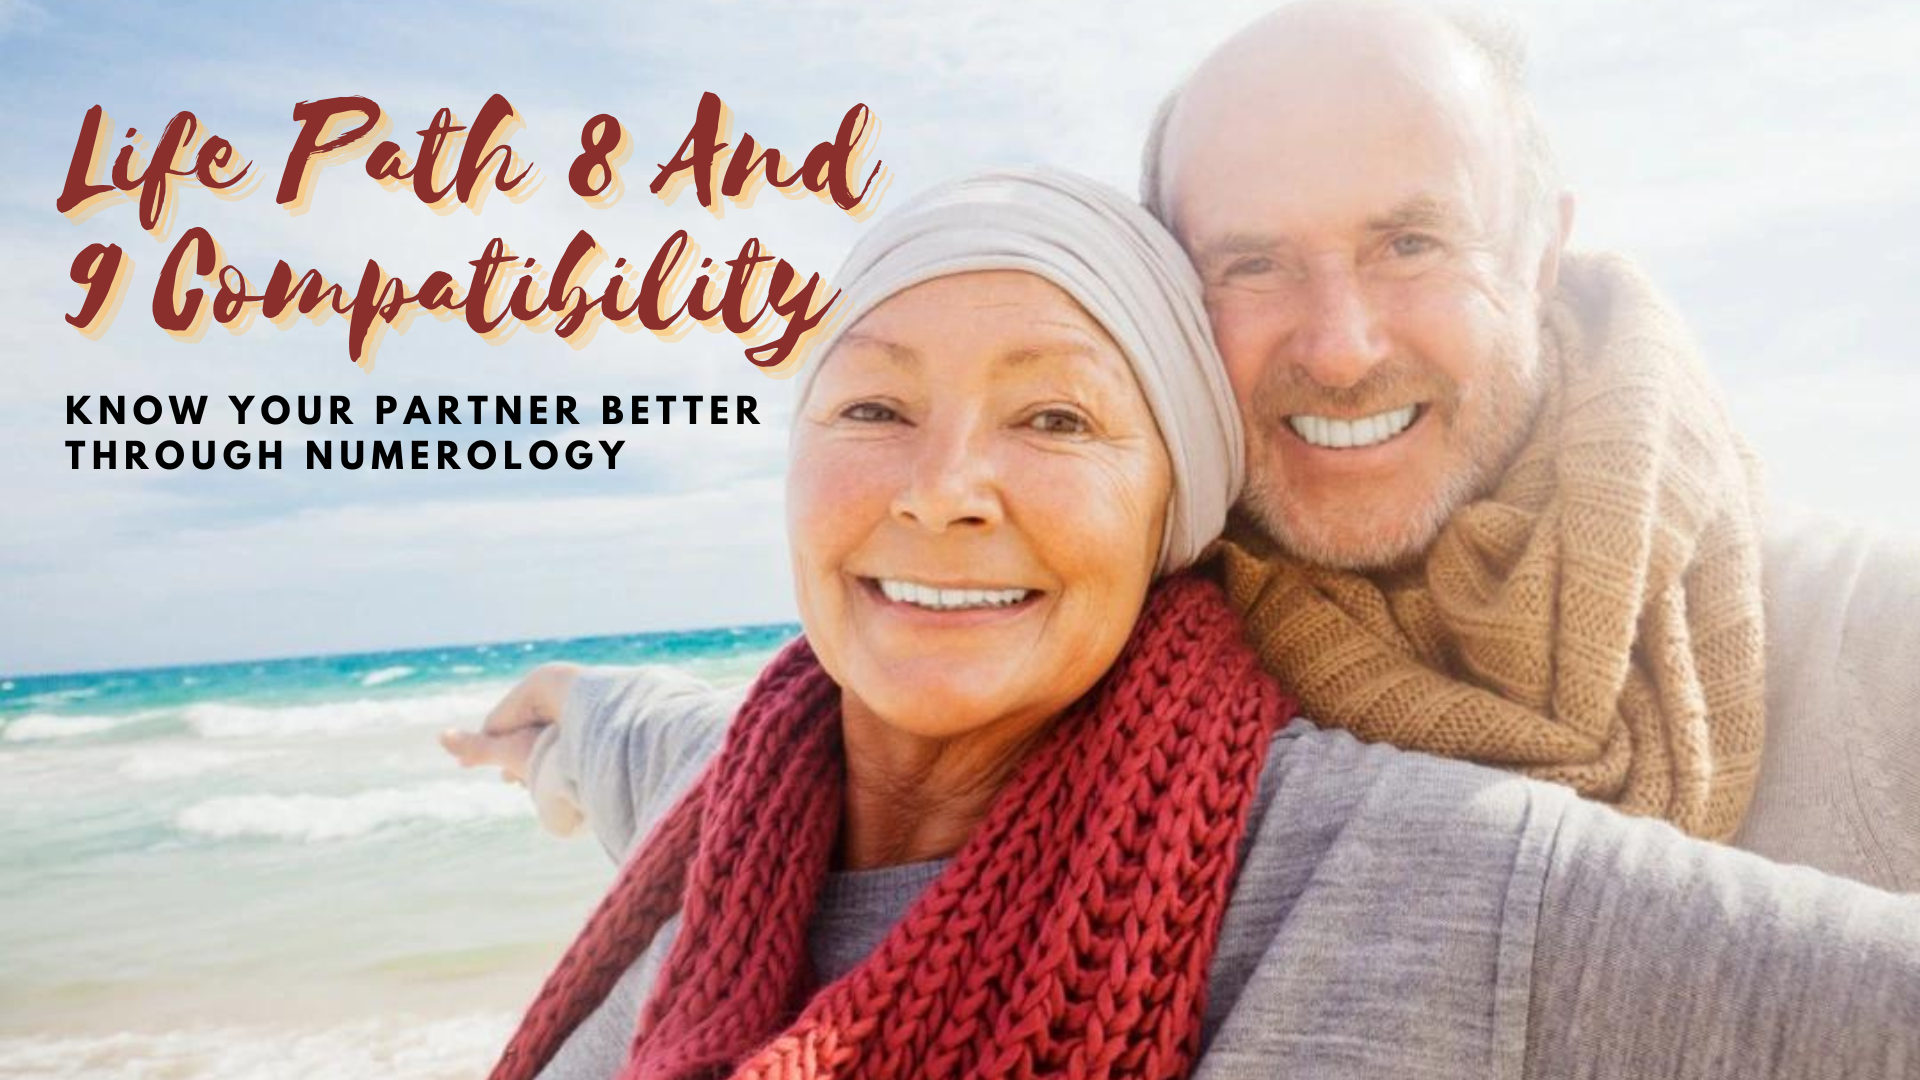 Life Path 8 And 9 Compatibility - Know Your Partner Better Through Numerology